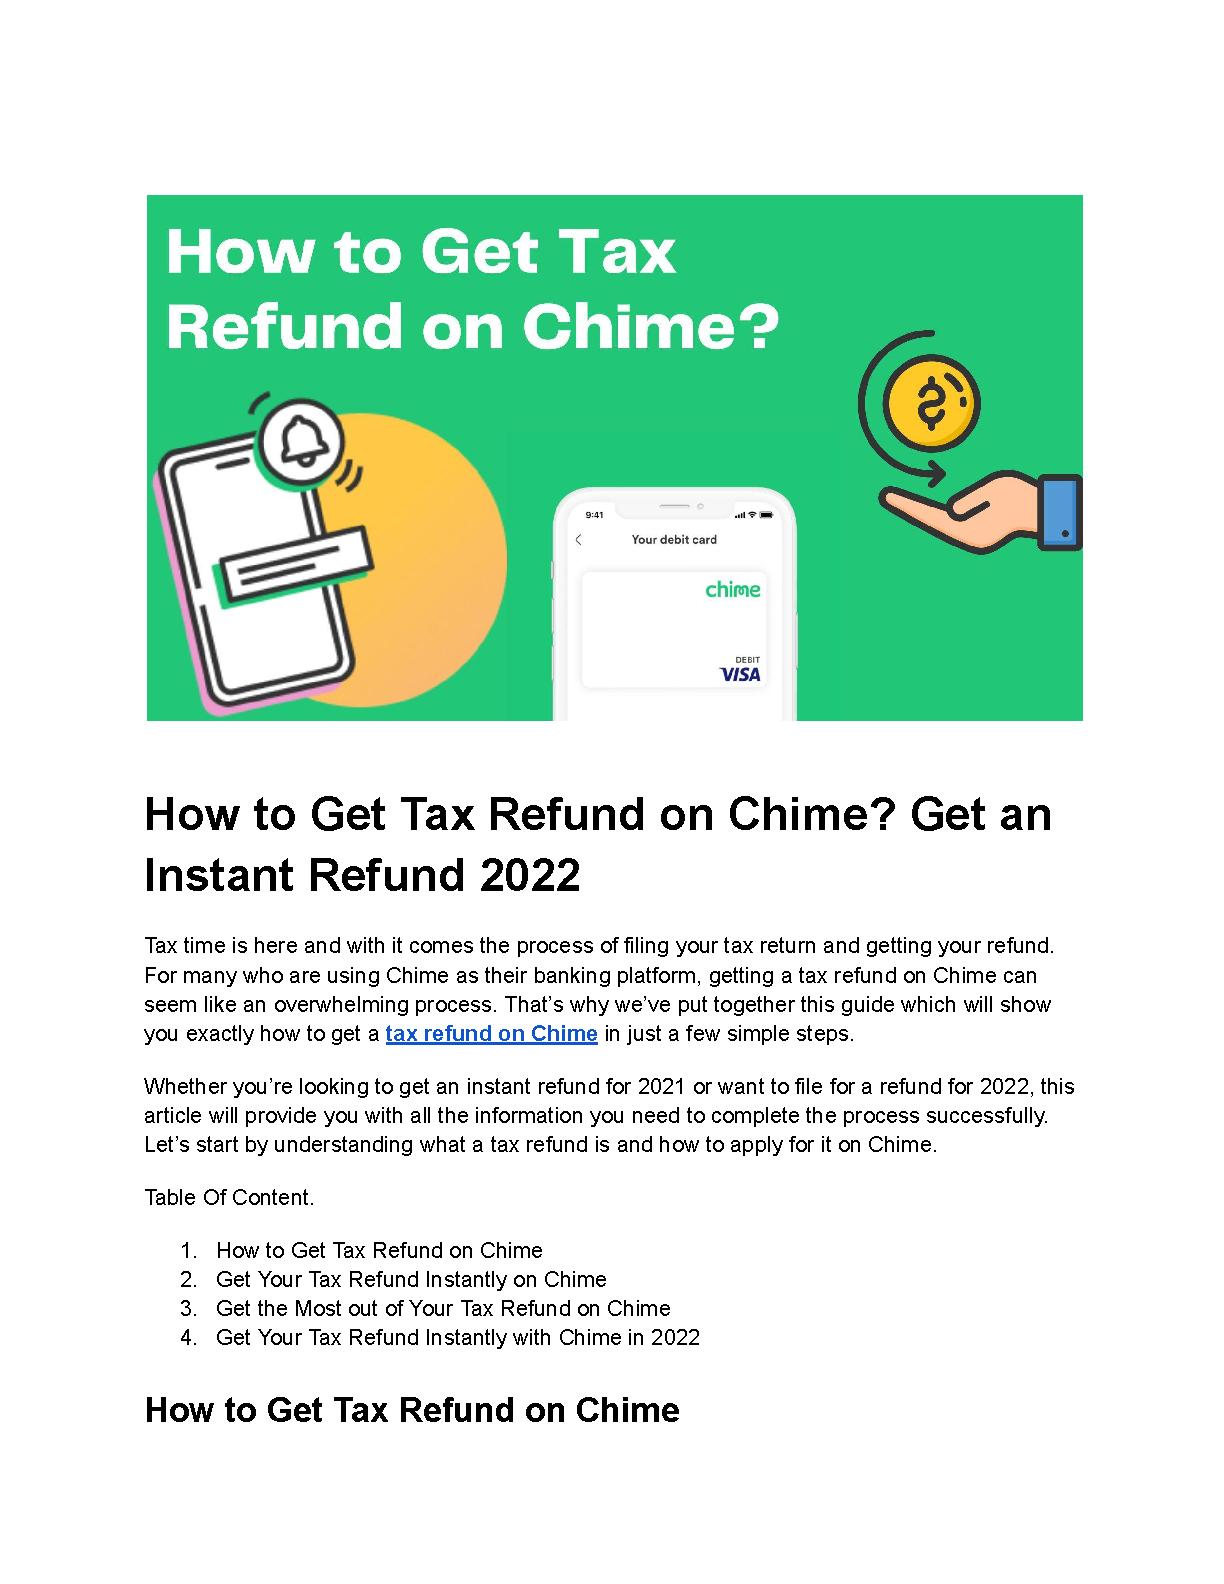 how-to-get-tax-refund-on-chime-pdf-host